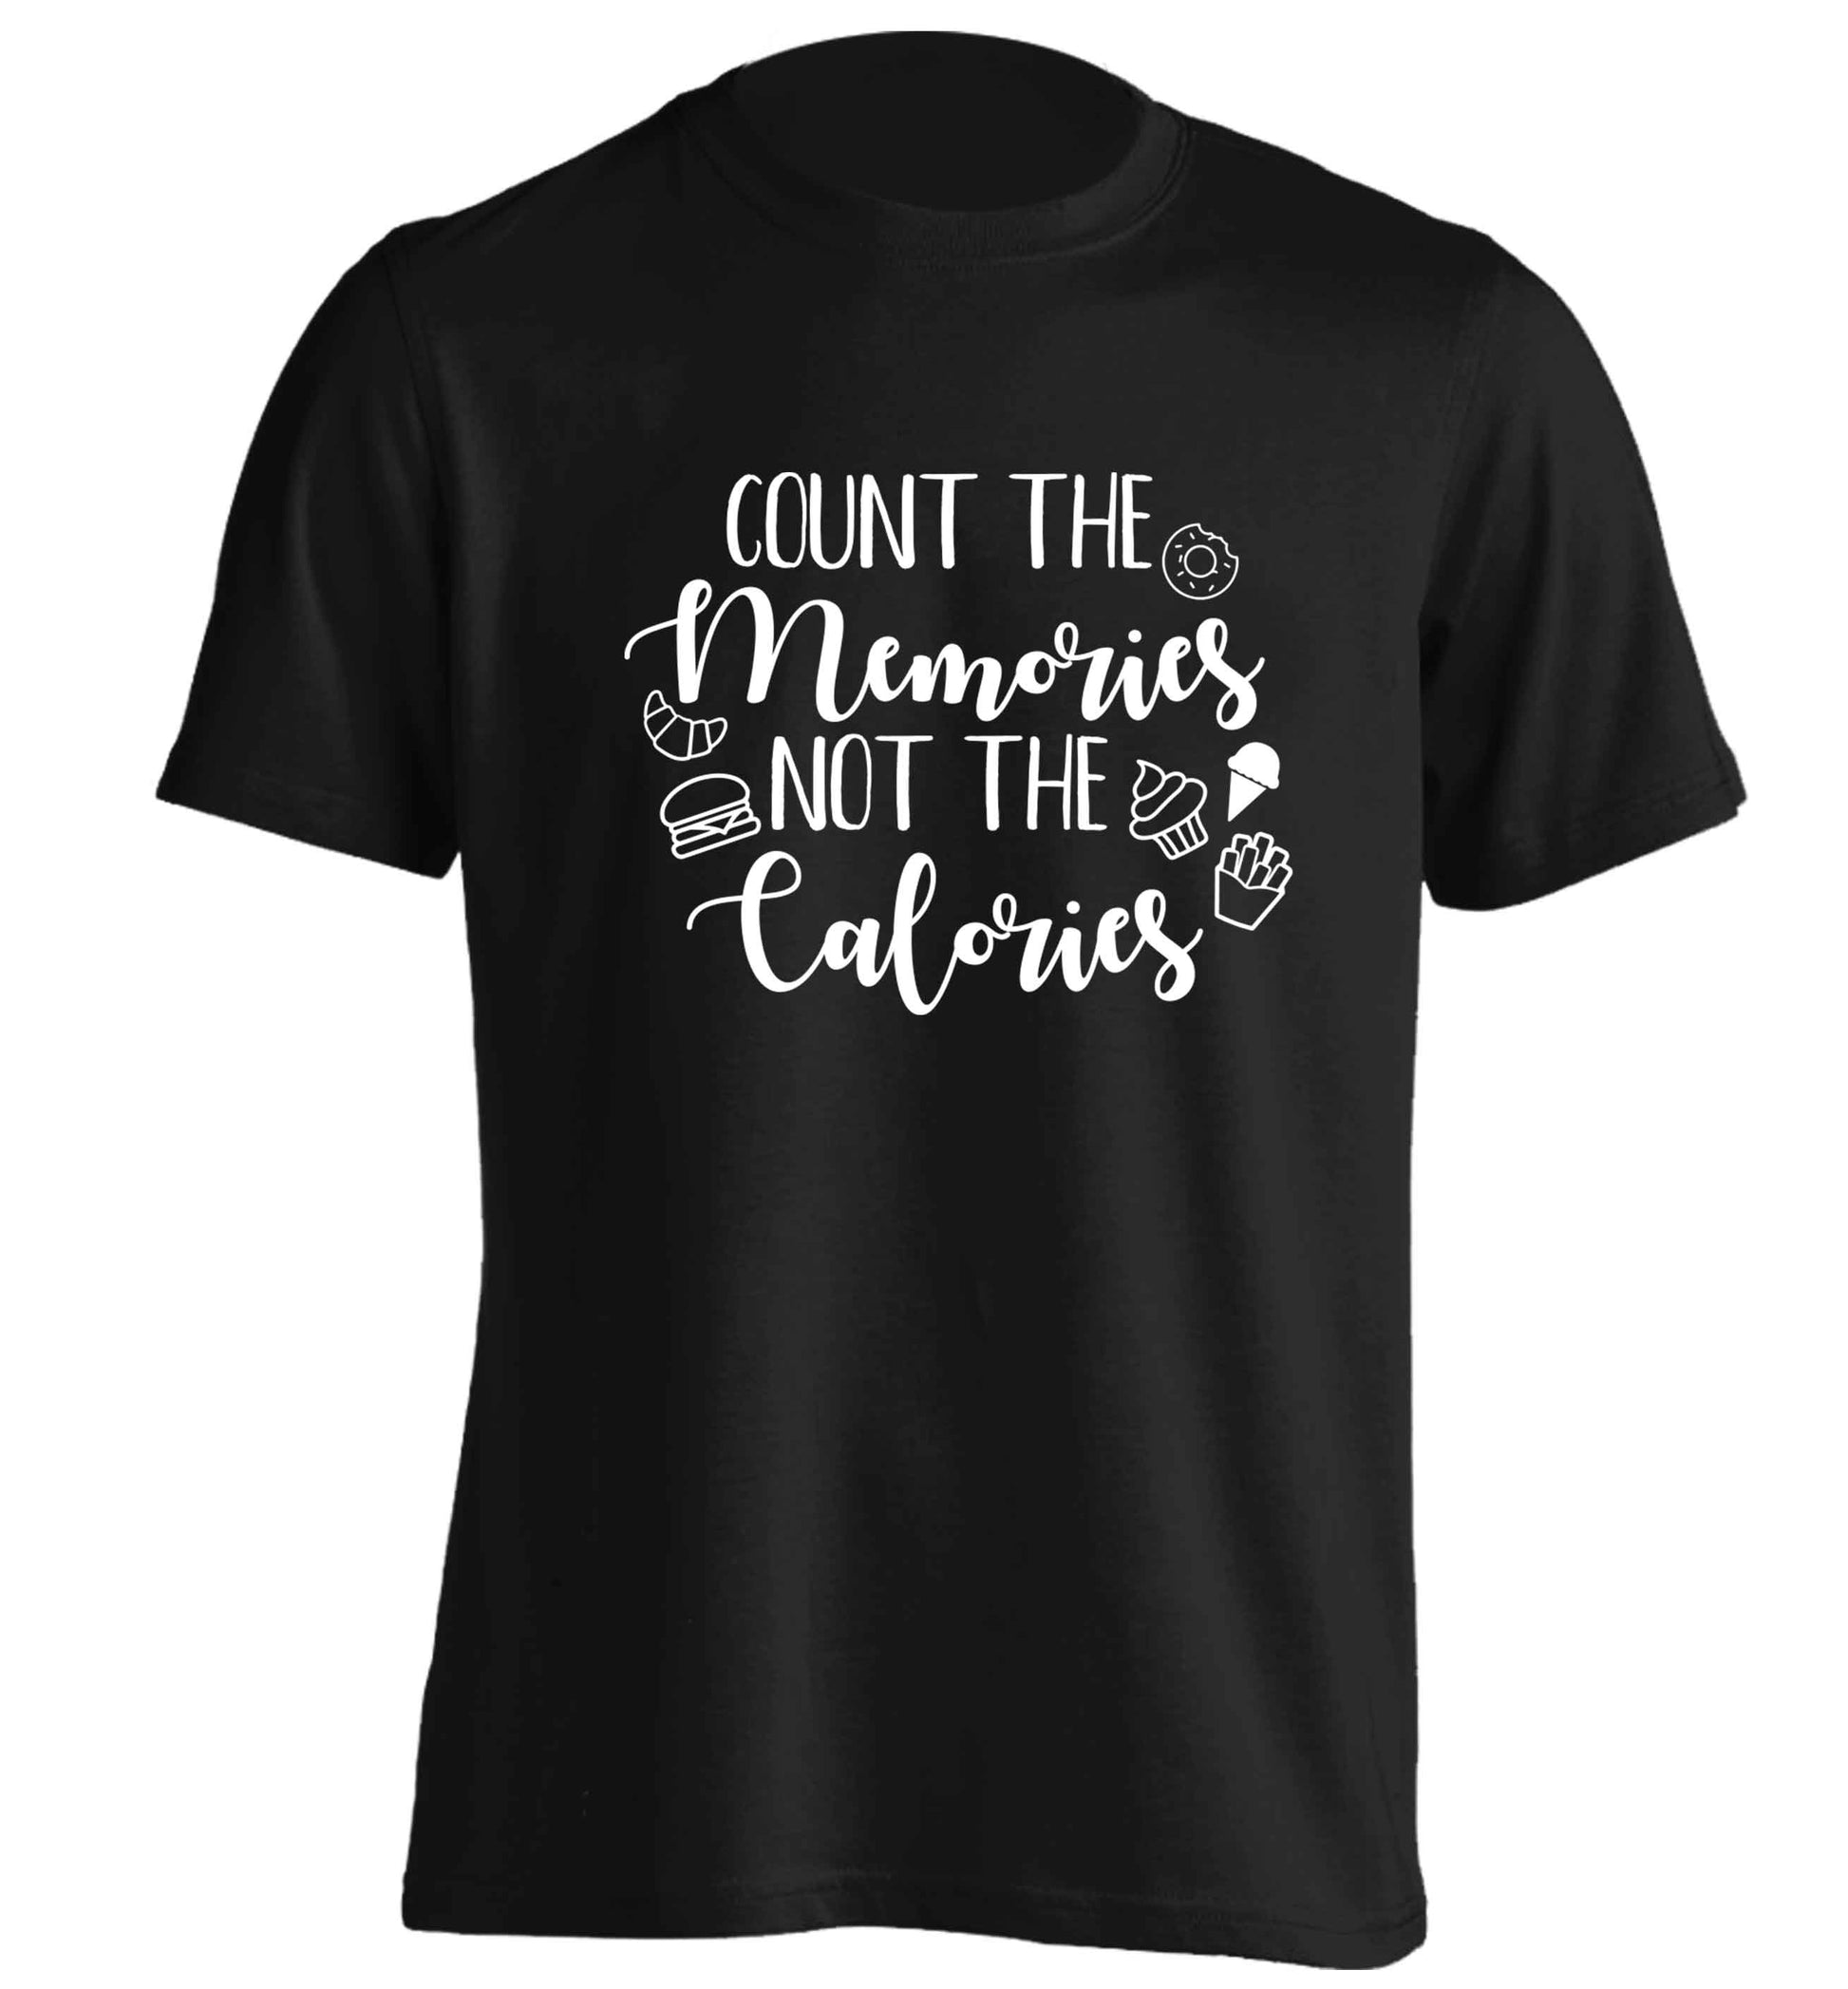 Count the memories not the calories adults unisex black Tshirt 2XL